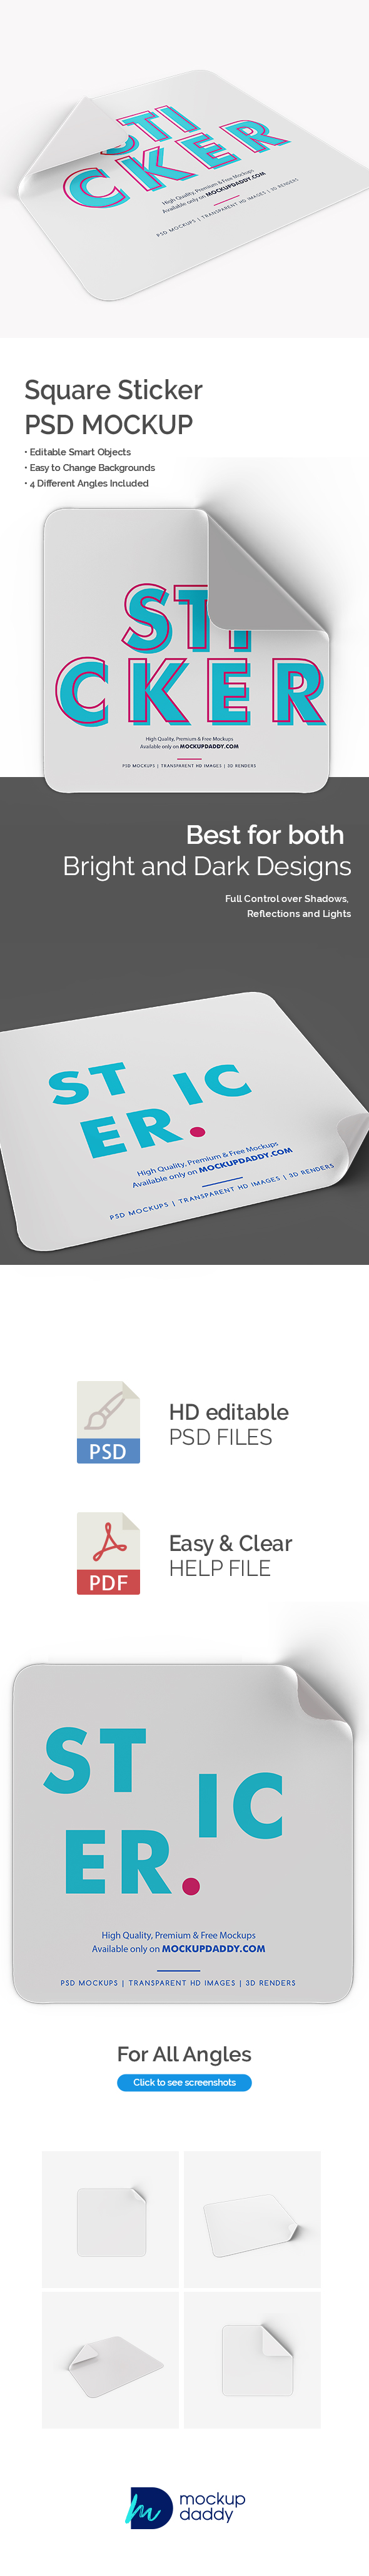 Square Adhesive Sticker Mockup Featured